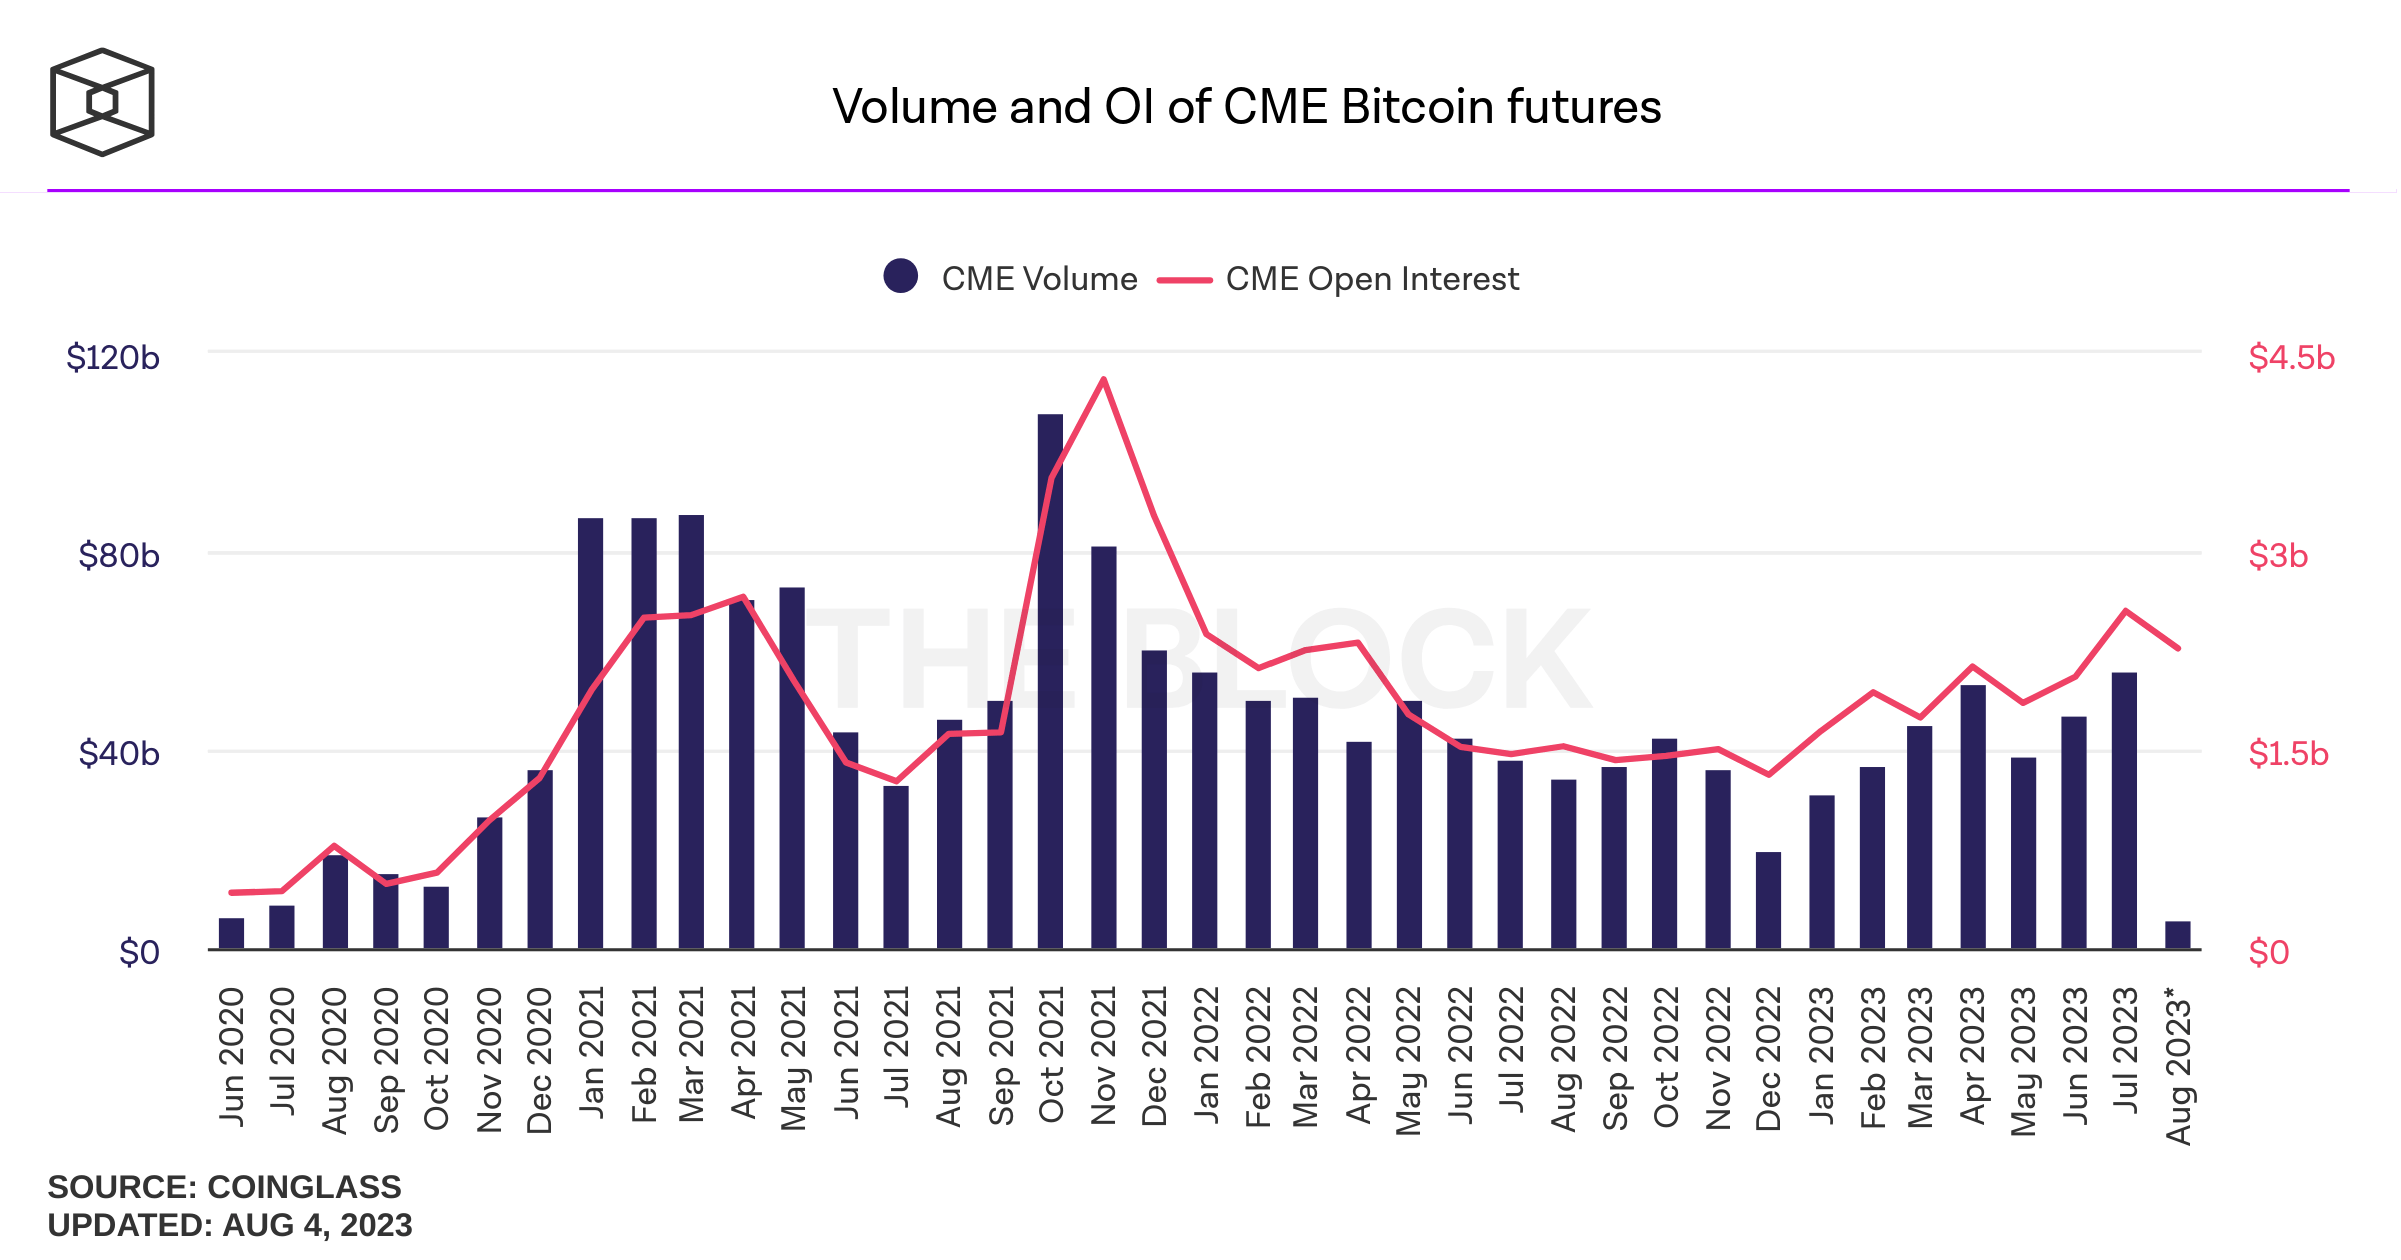 Volume and OI of CME Bitcoin futures